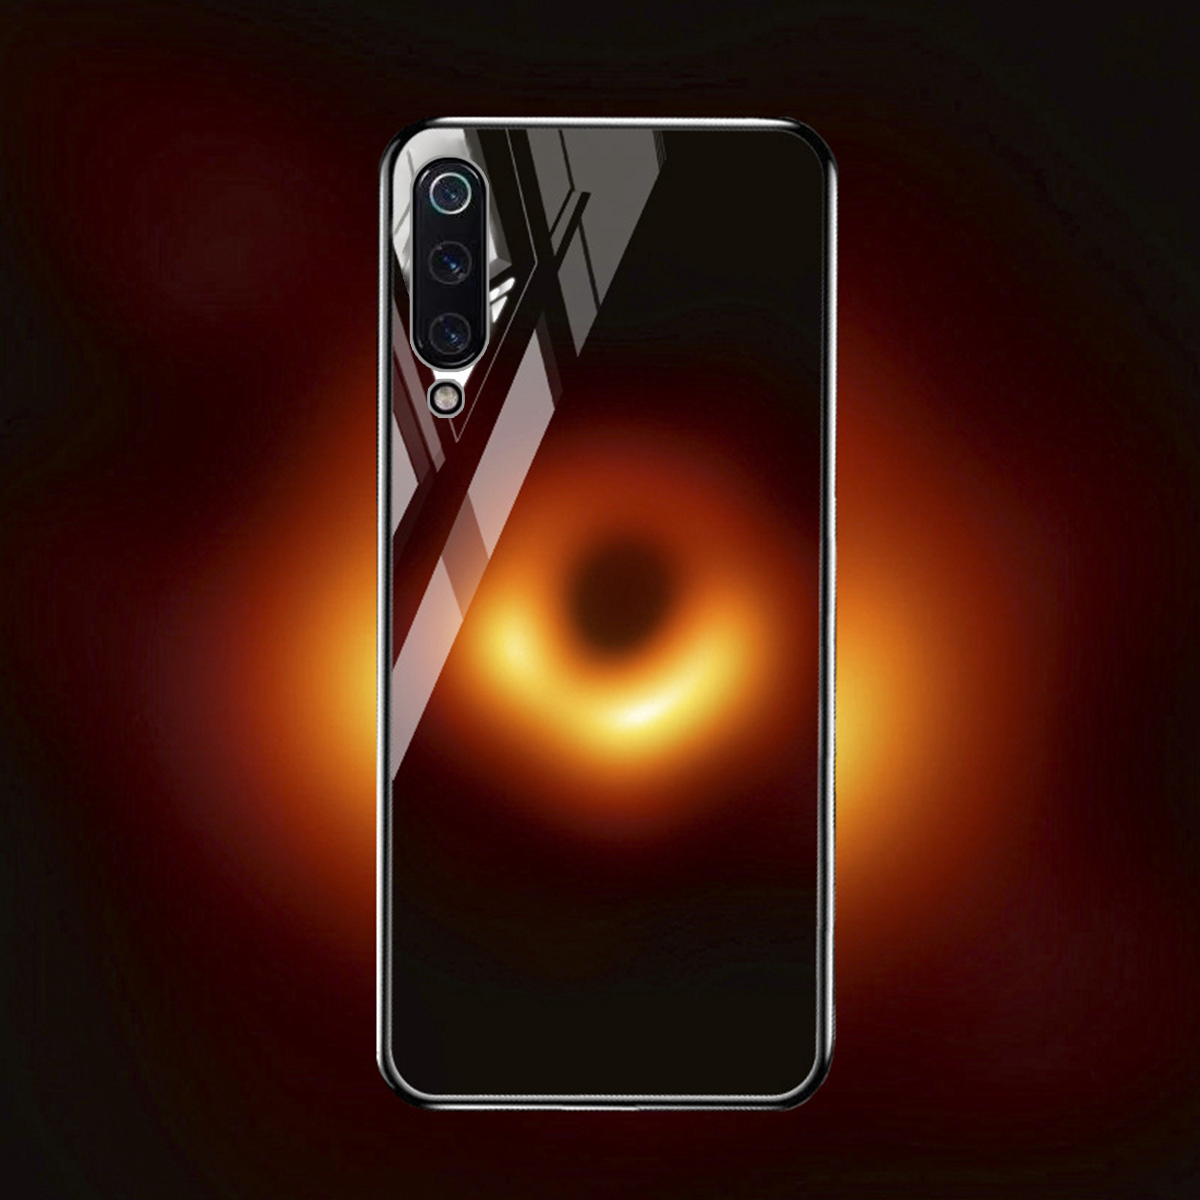 

Bakeey Black Hole Scratch Resistant Tempered Glass Protective Case For Xiaomi Mi 9 / Xiaomi Mi9 Transparent Edition